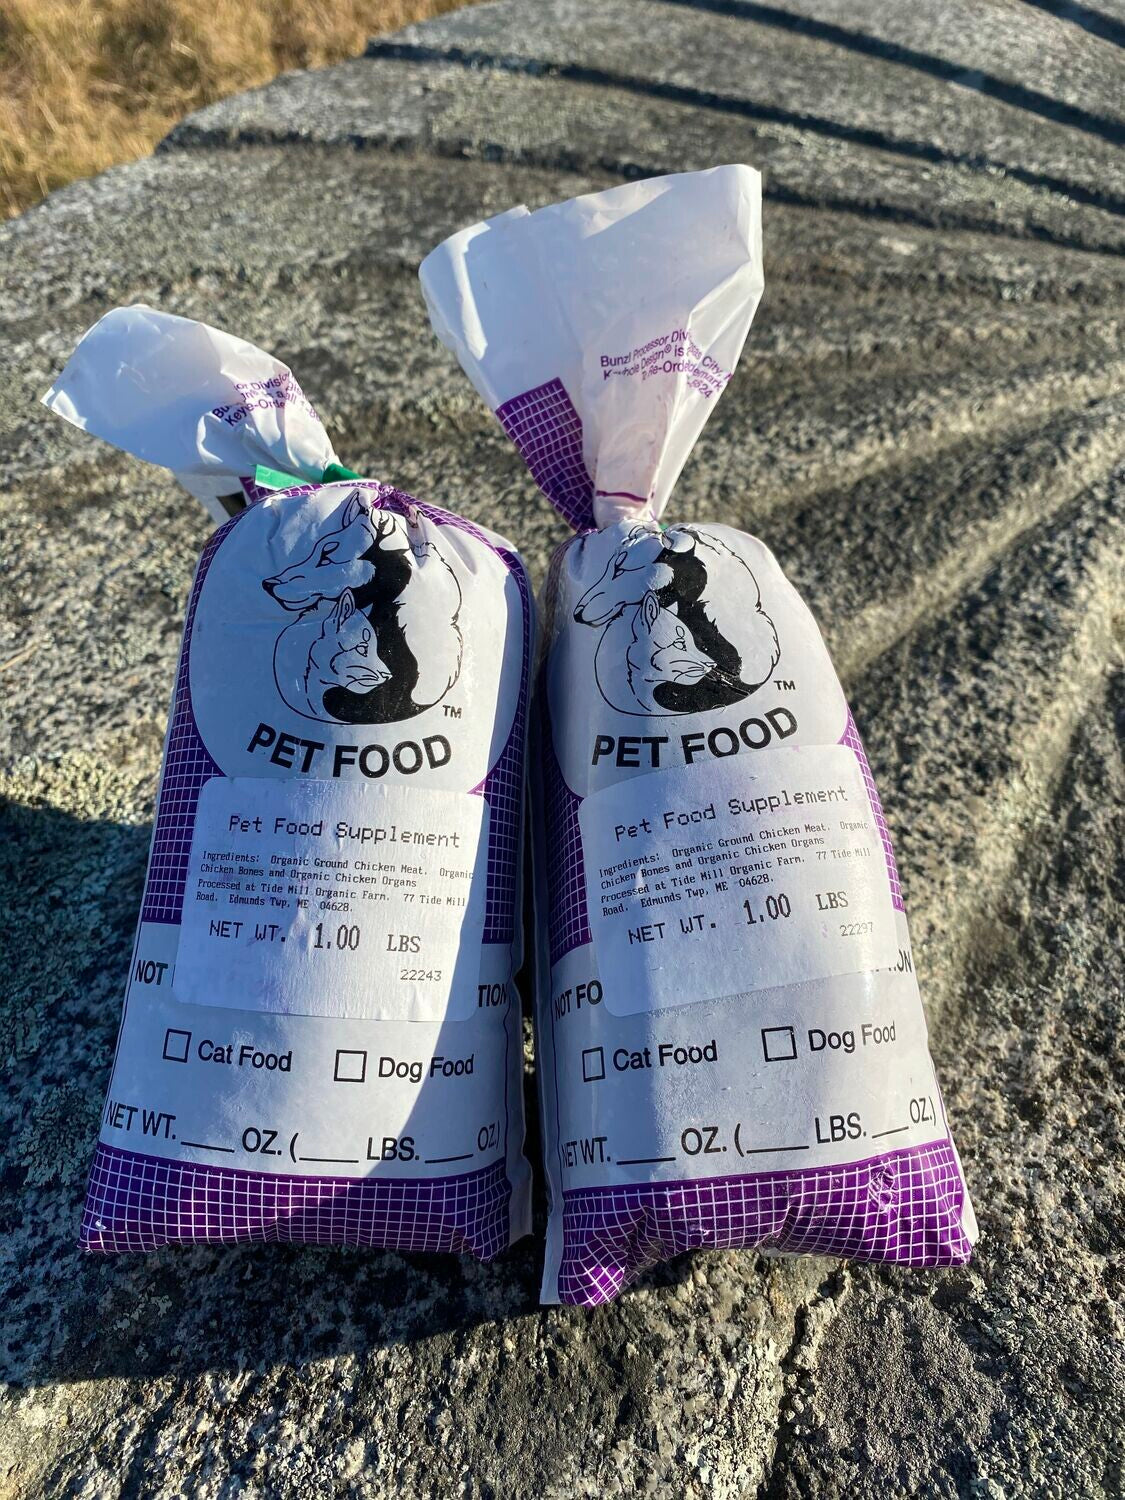 Two Bags of Organic Pet Food Supplement